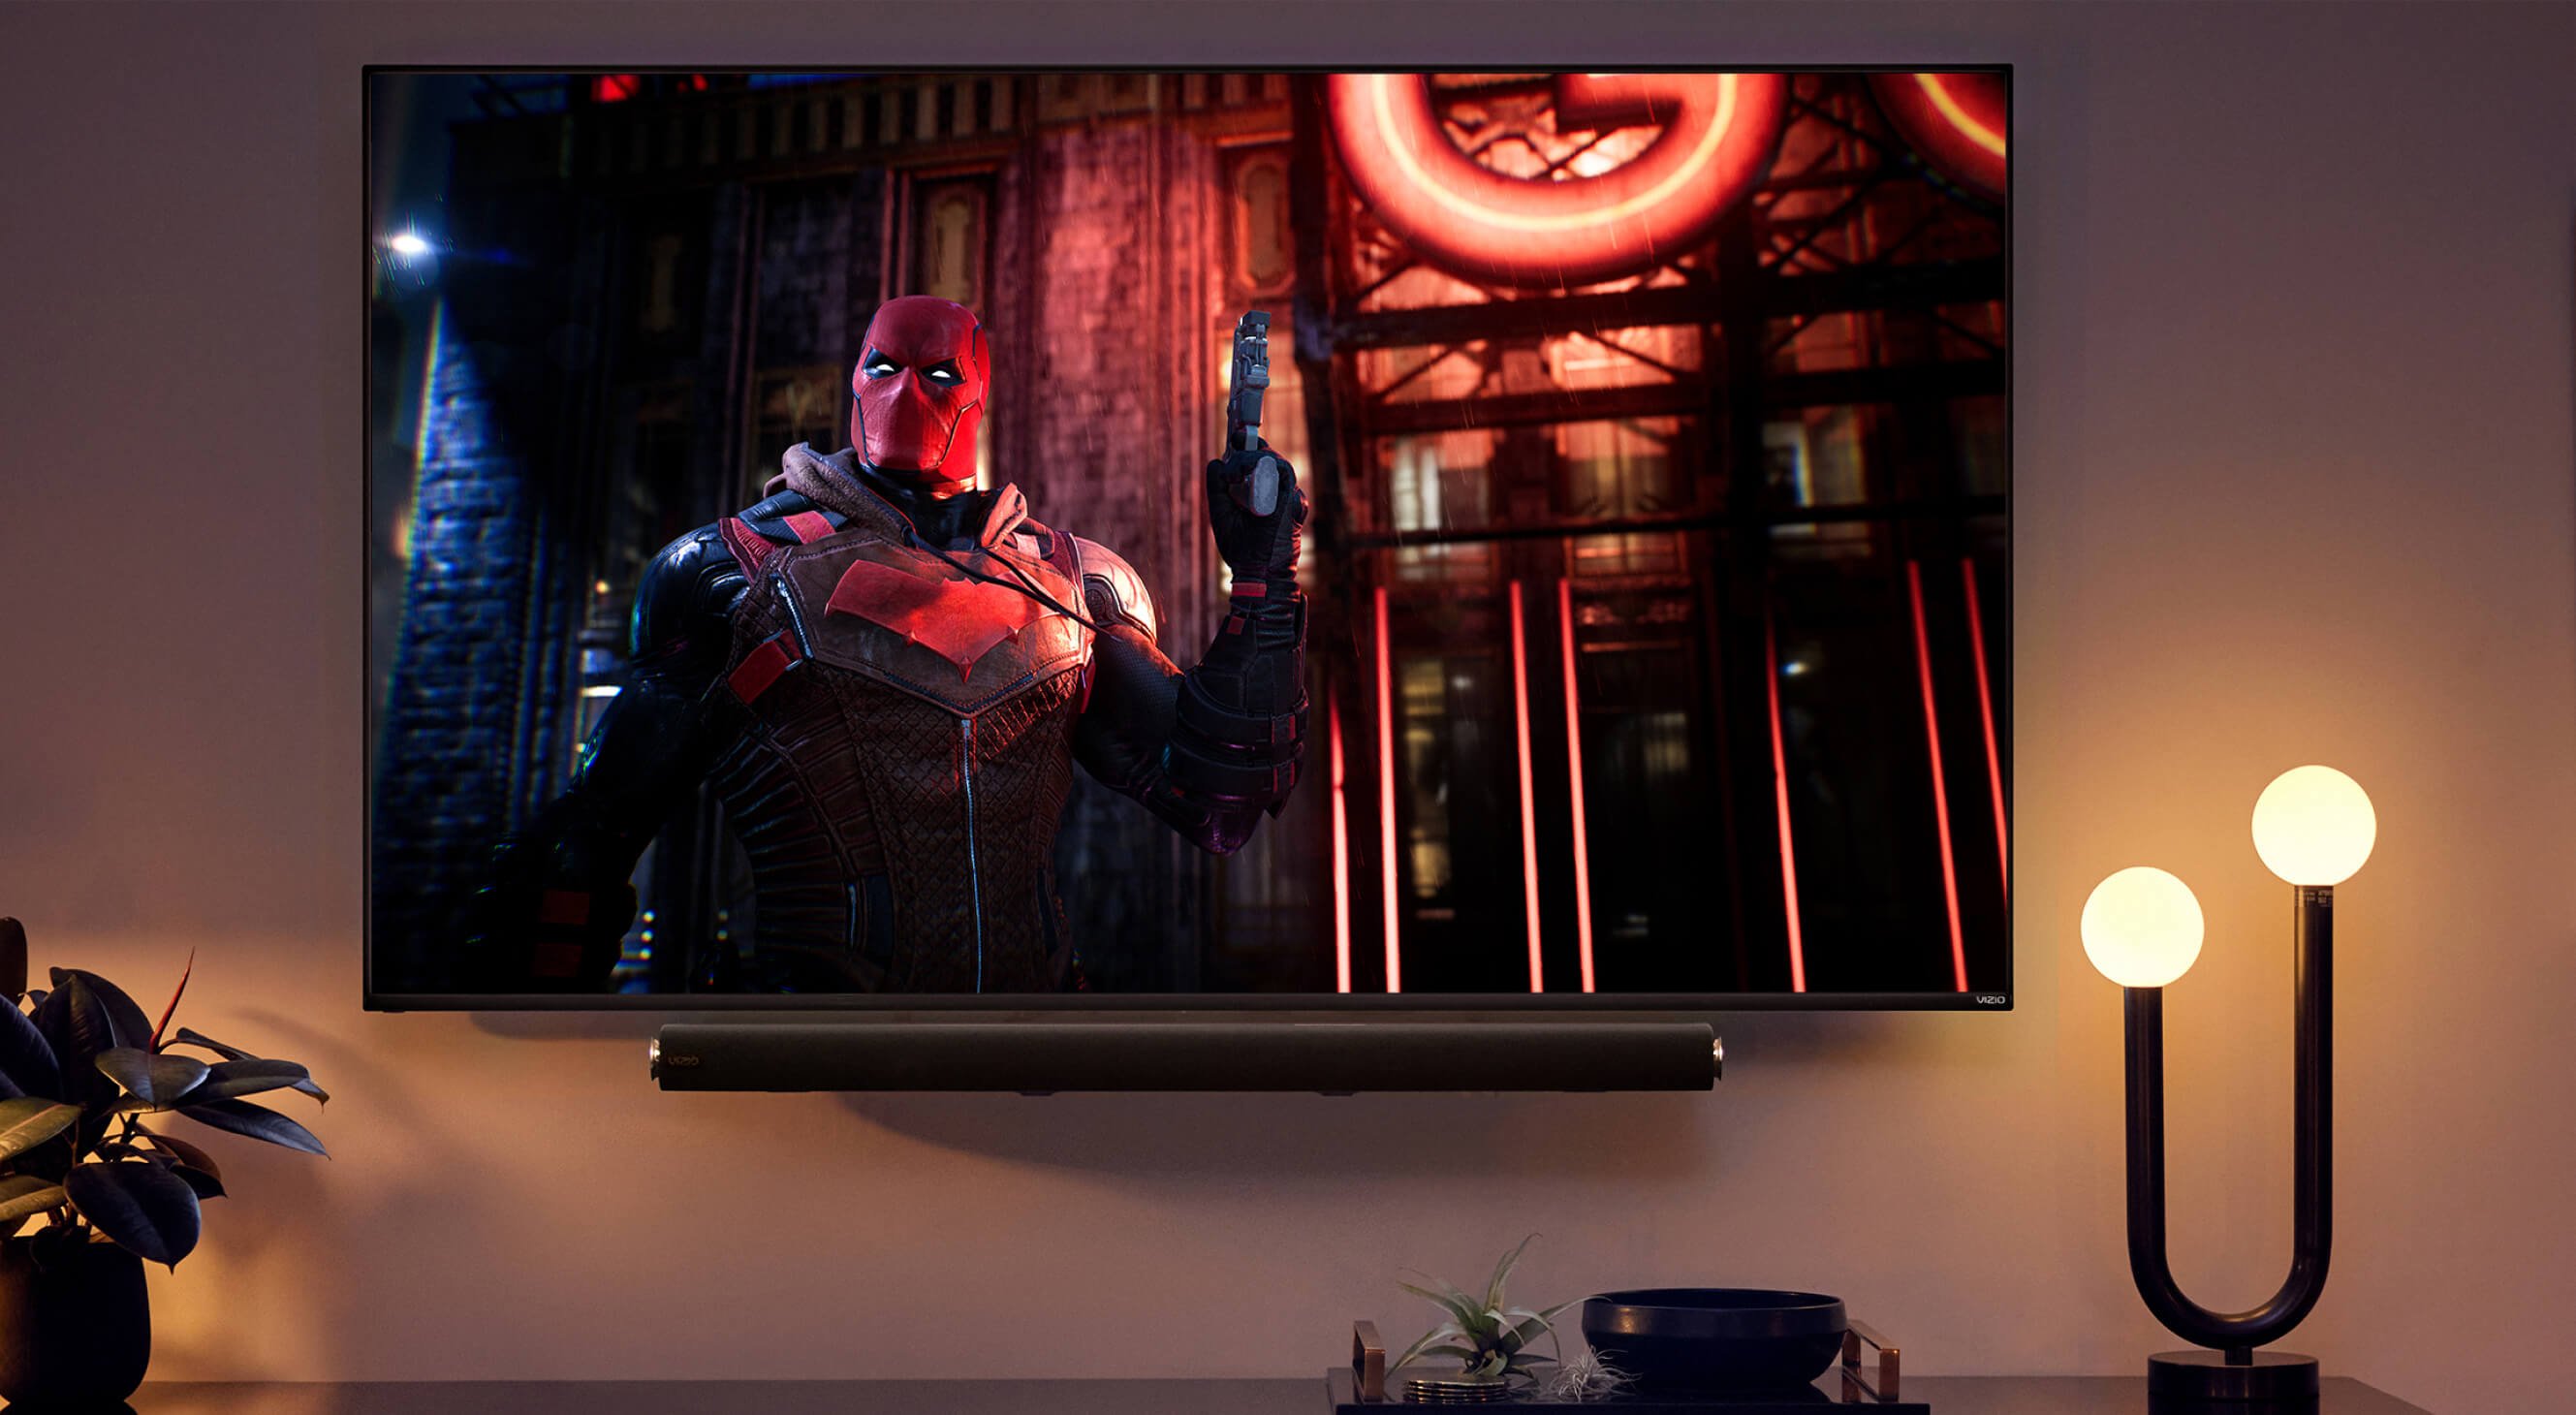 The BEST Gaming TV! [4K HDR 120hz G-Sync]